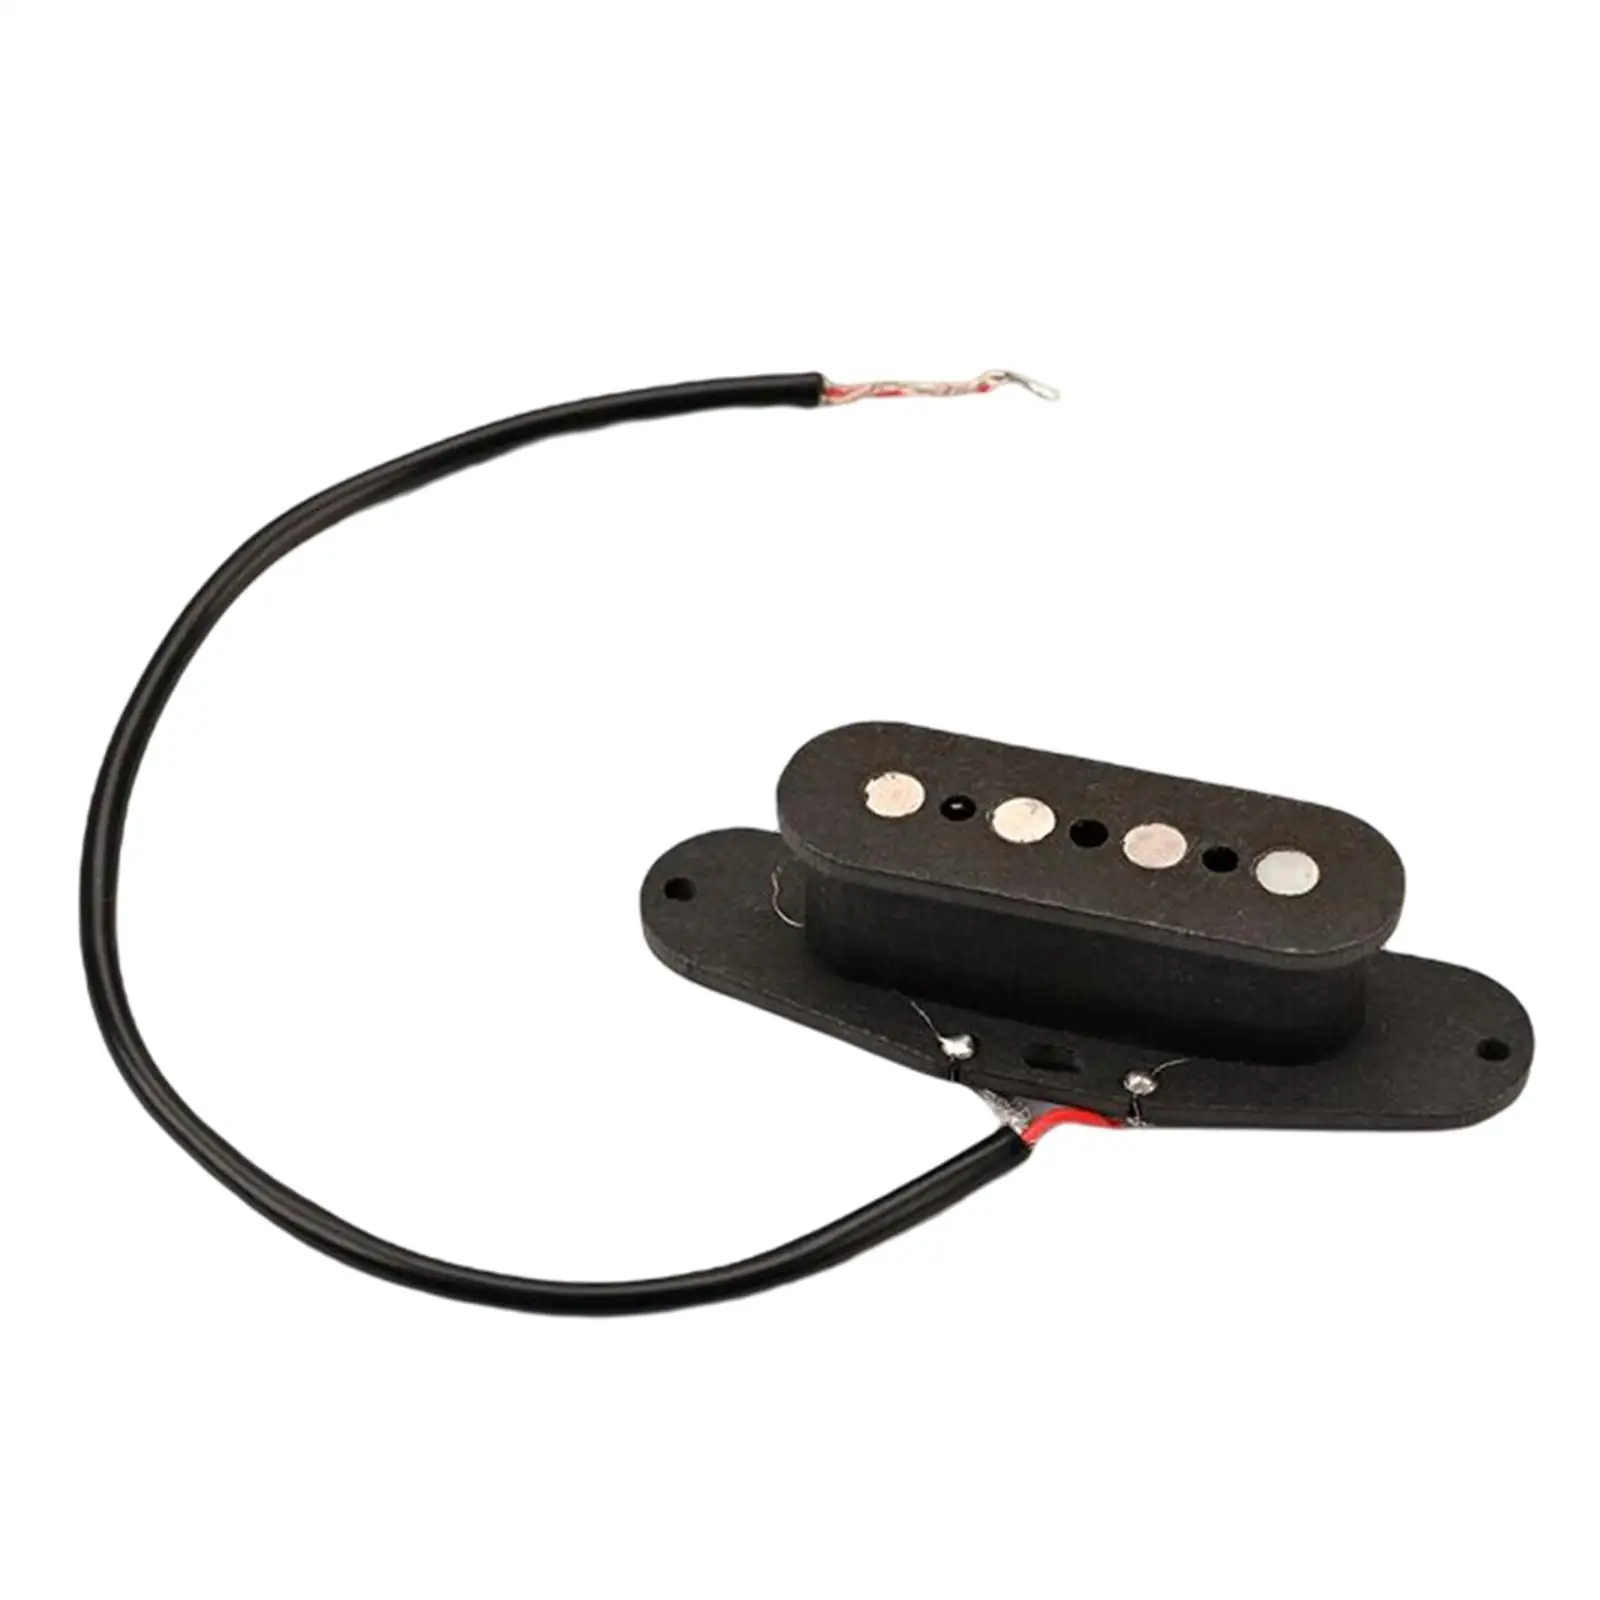 4 String Pickup Musical Instrument Tools Fidelity Wider Audio for Players